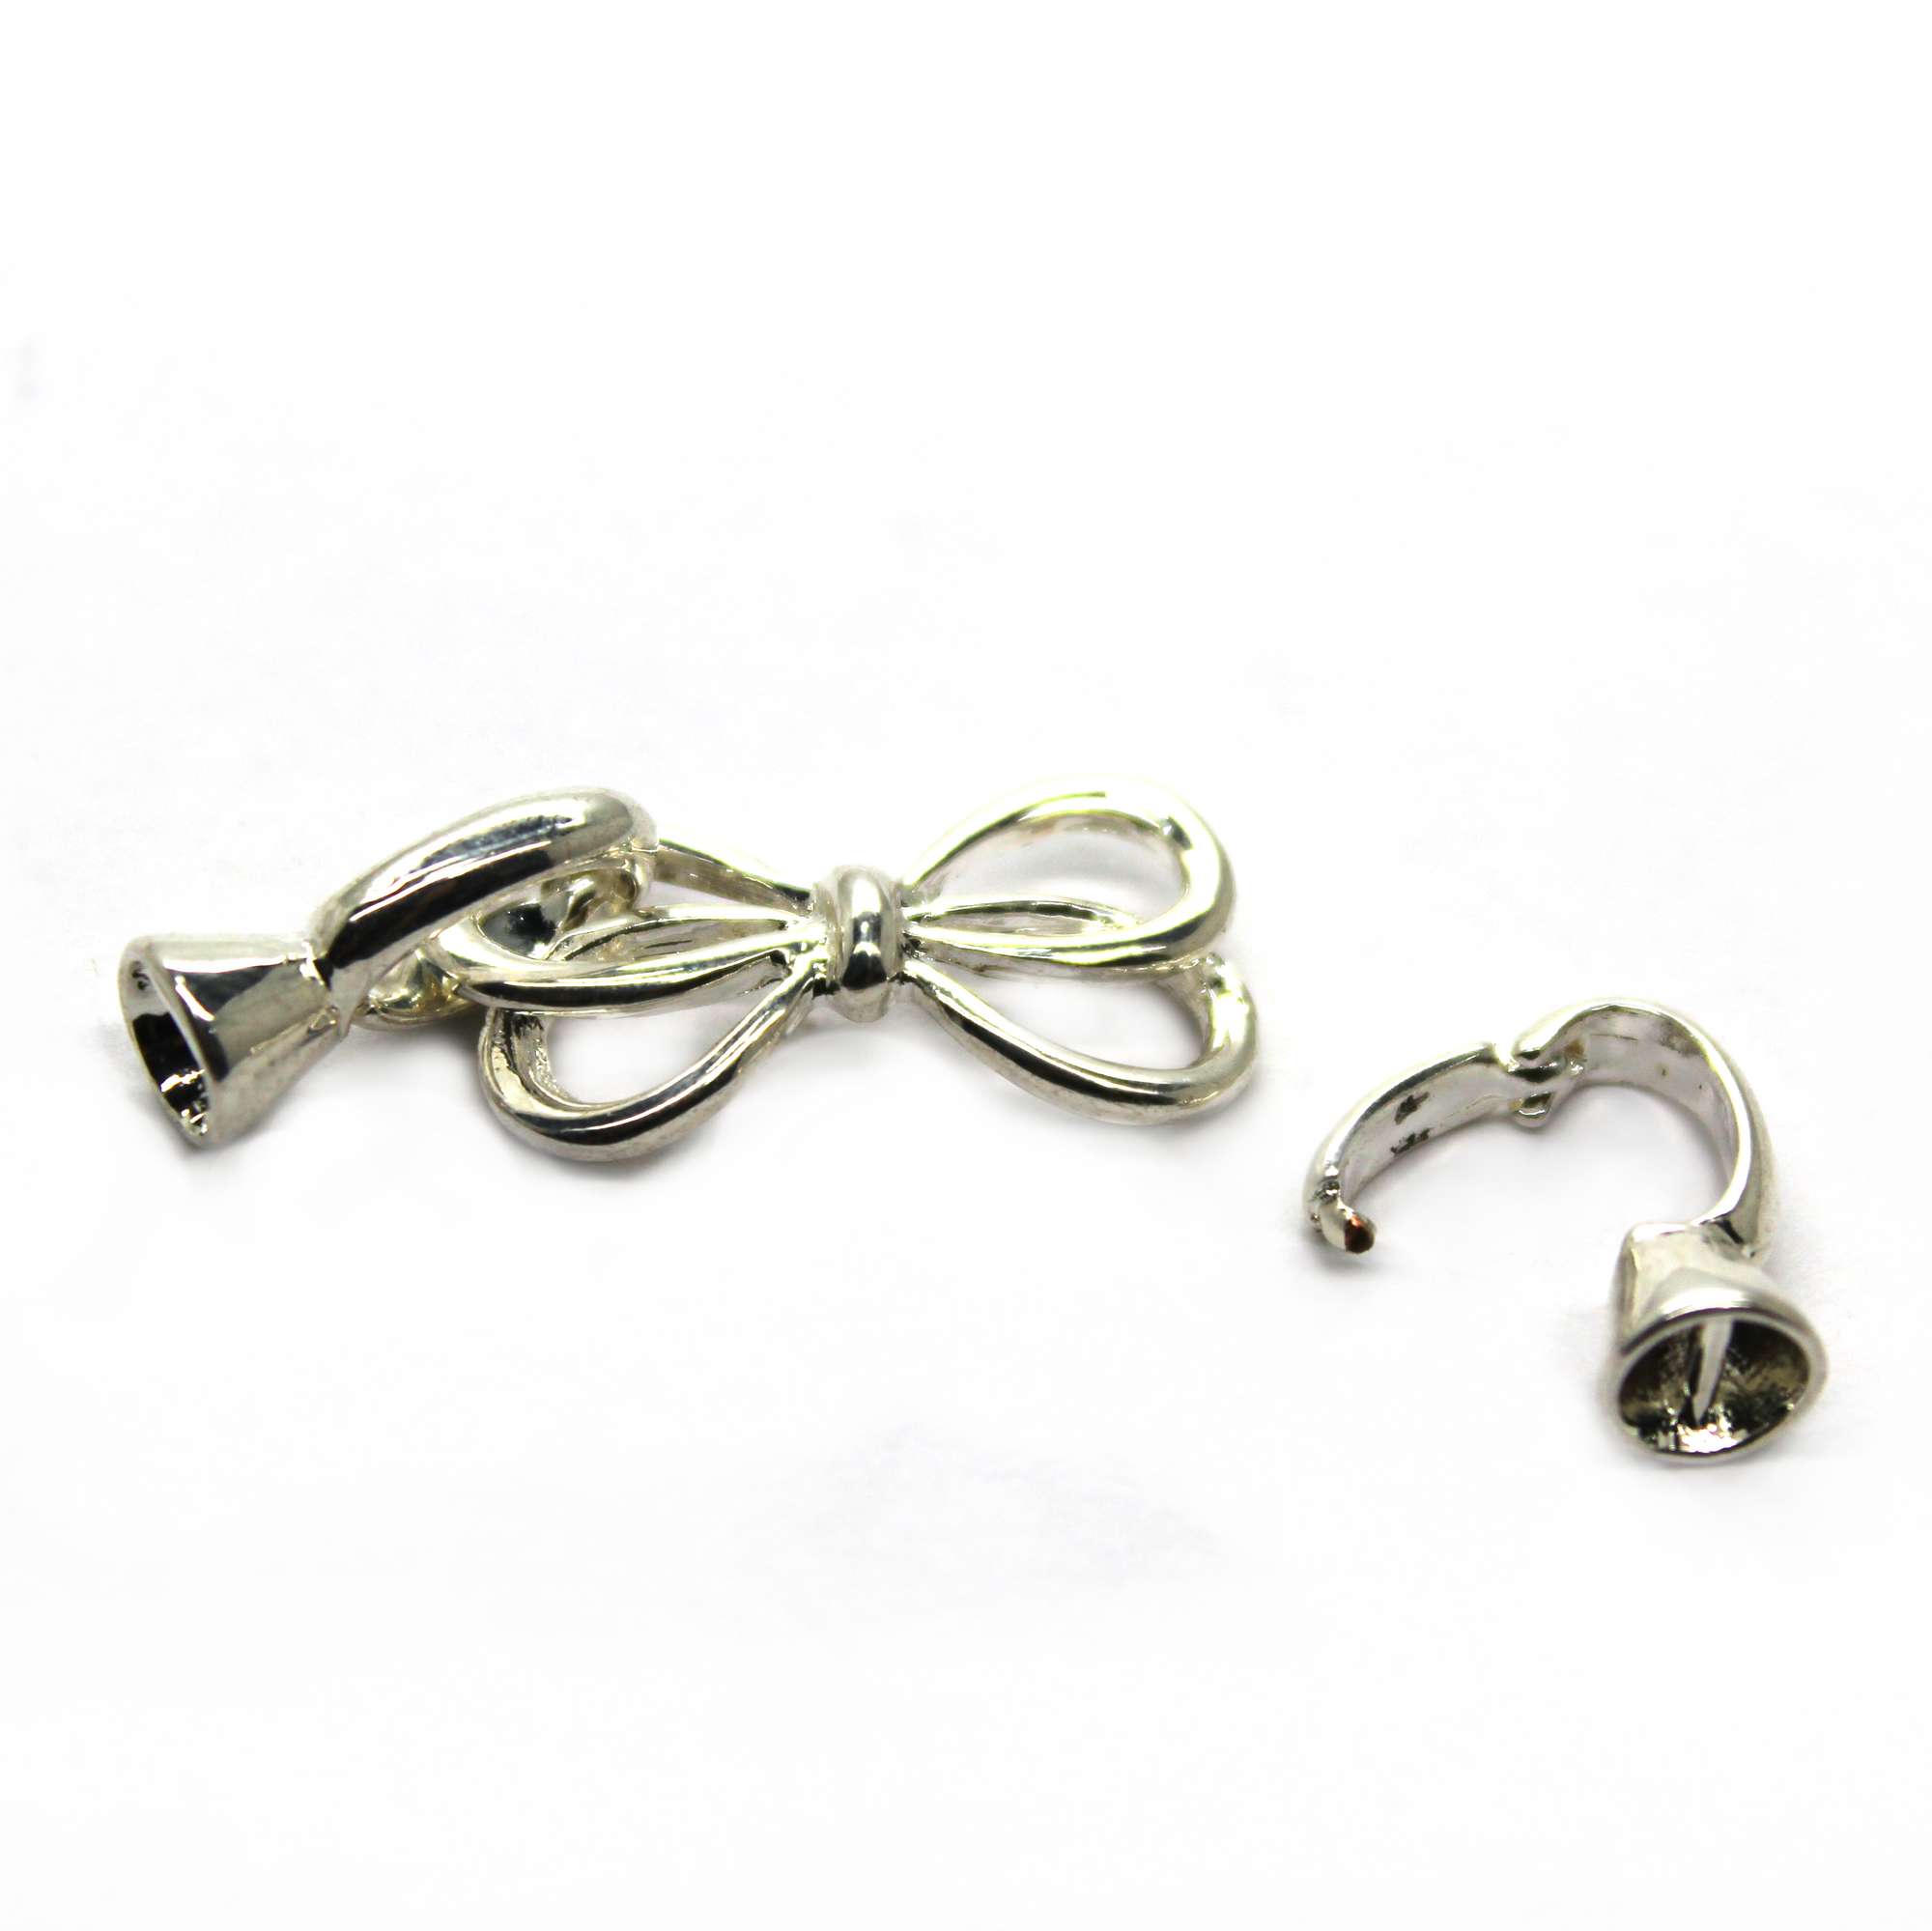 Clasp, Bow Connector, Alloy, Bright Silver, 46mm x 12mm x 7mm, Sold Per pkg of 1 set